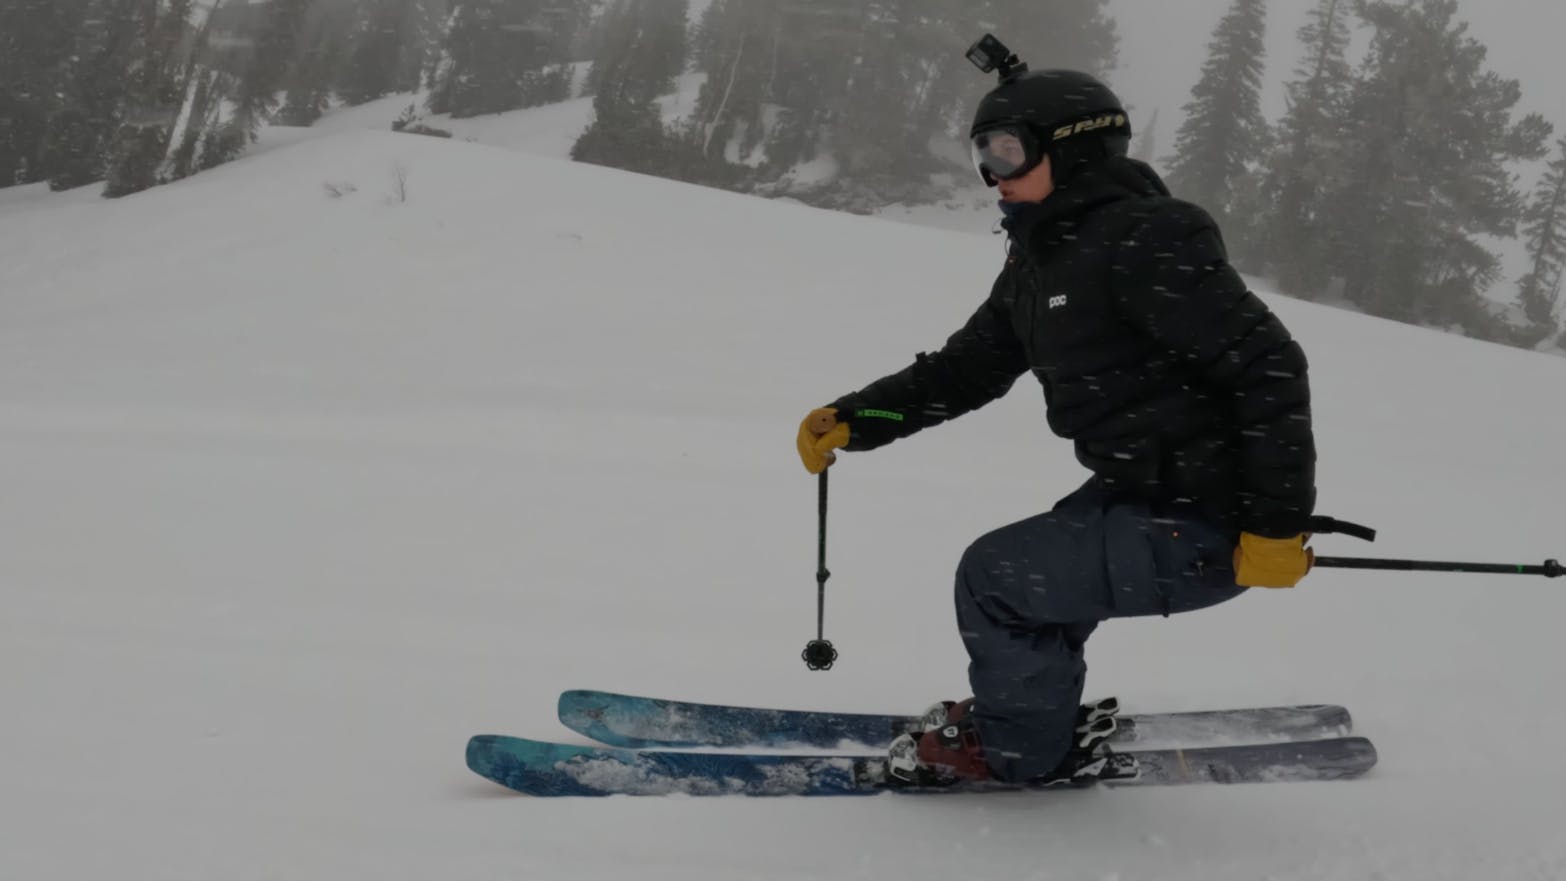 Curated Ski Expert Daryl Morrison on the 2023 Atomic Bent Chetler 100 skis on a groomed run in foggy conditions